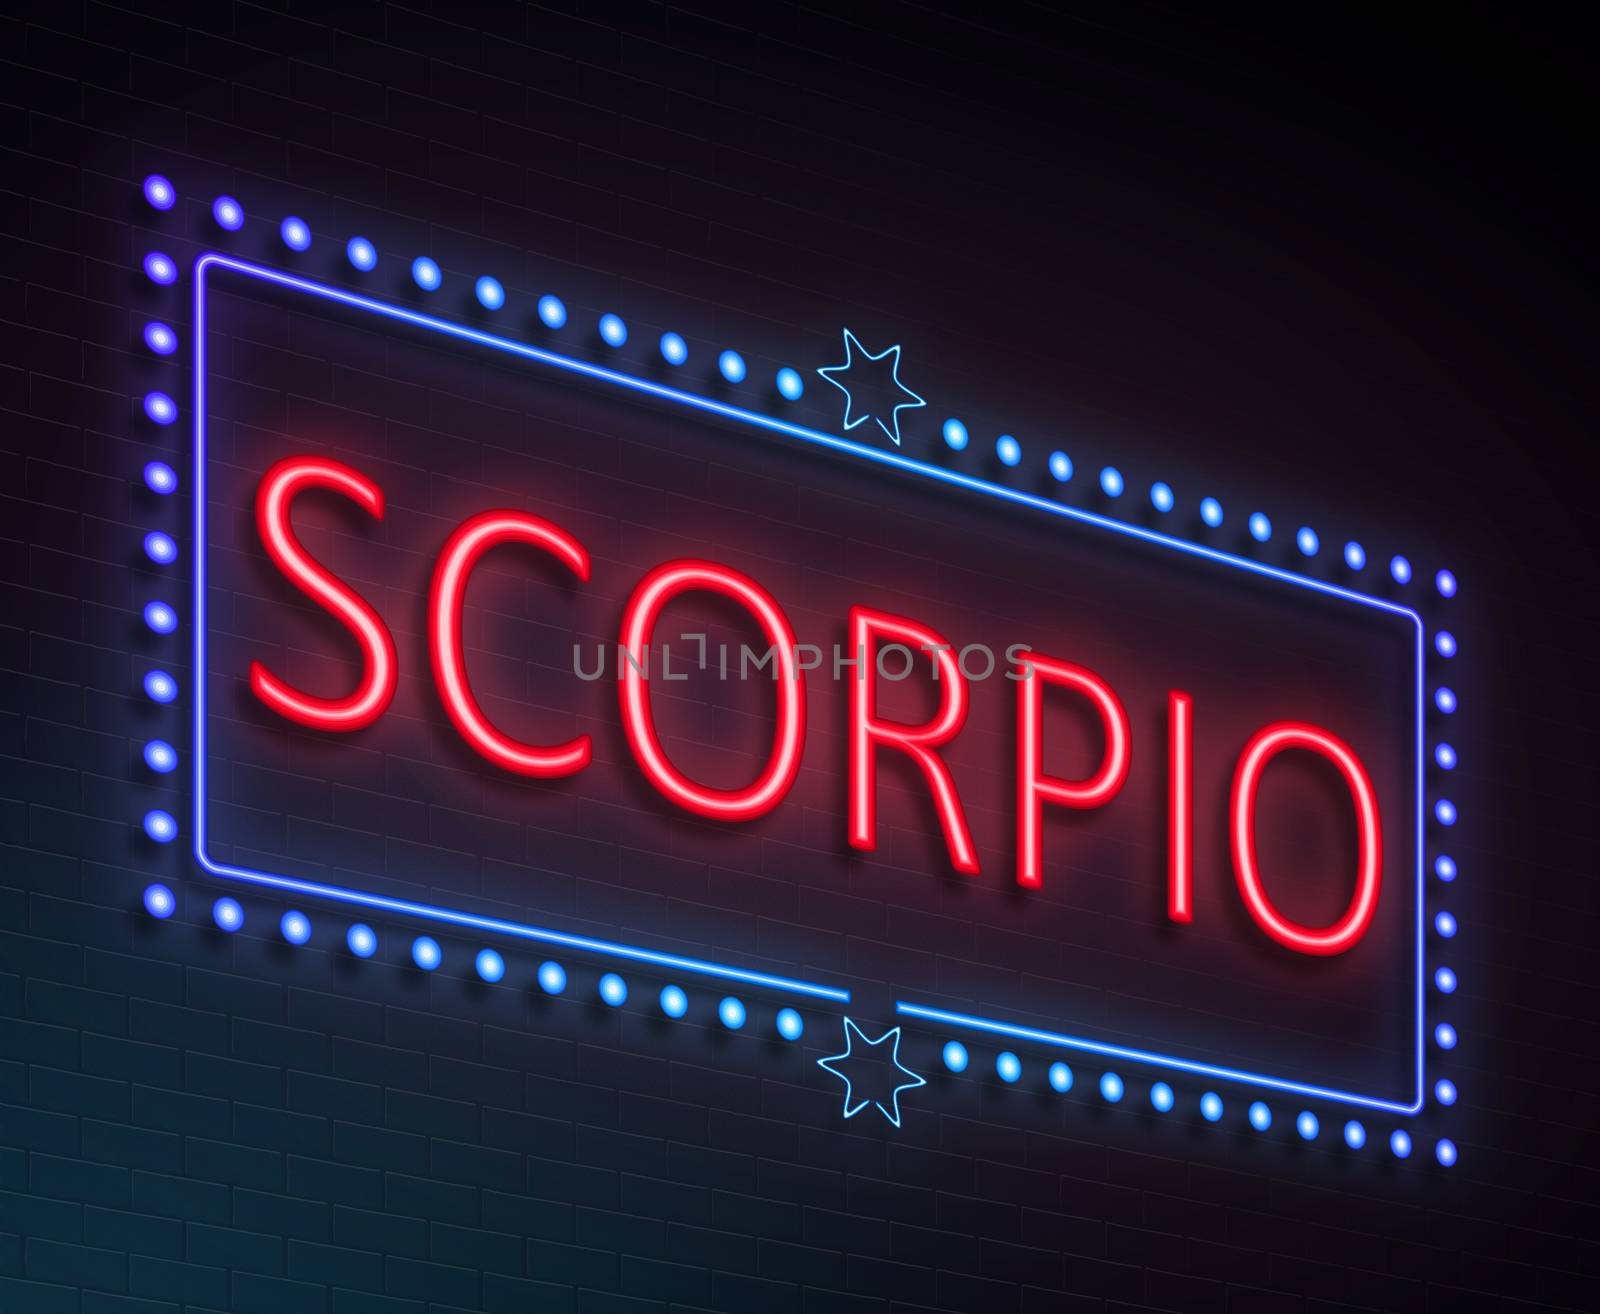 Illustration depicting an illuminated neon sign with a scorpio concept.